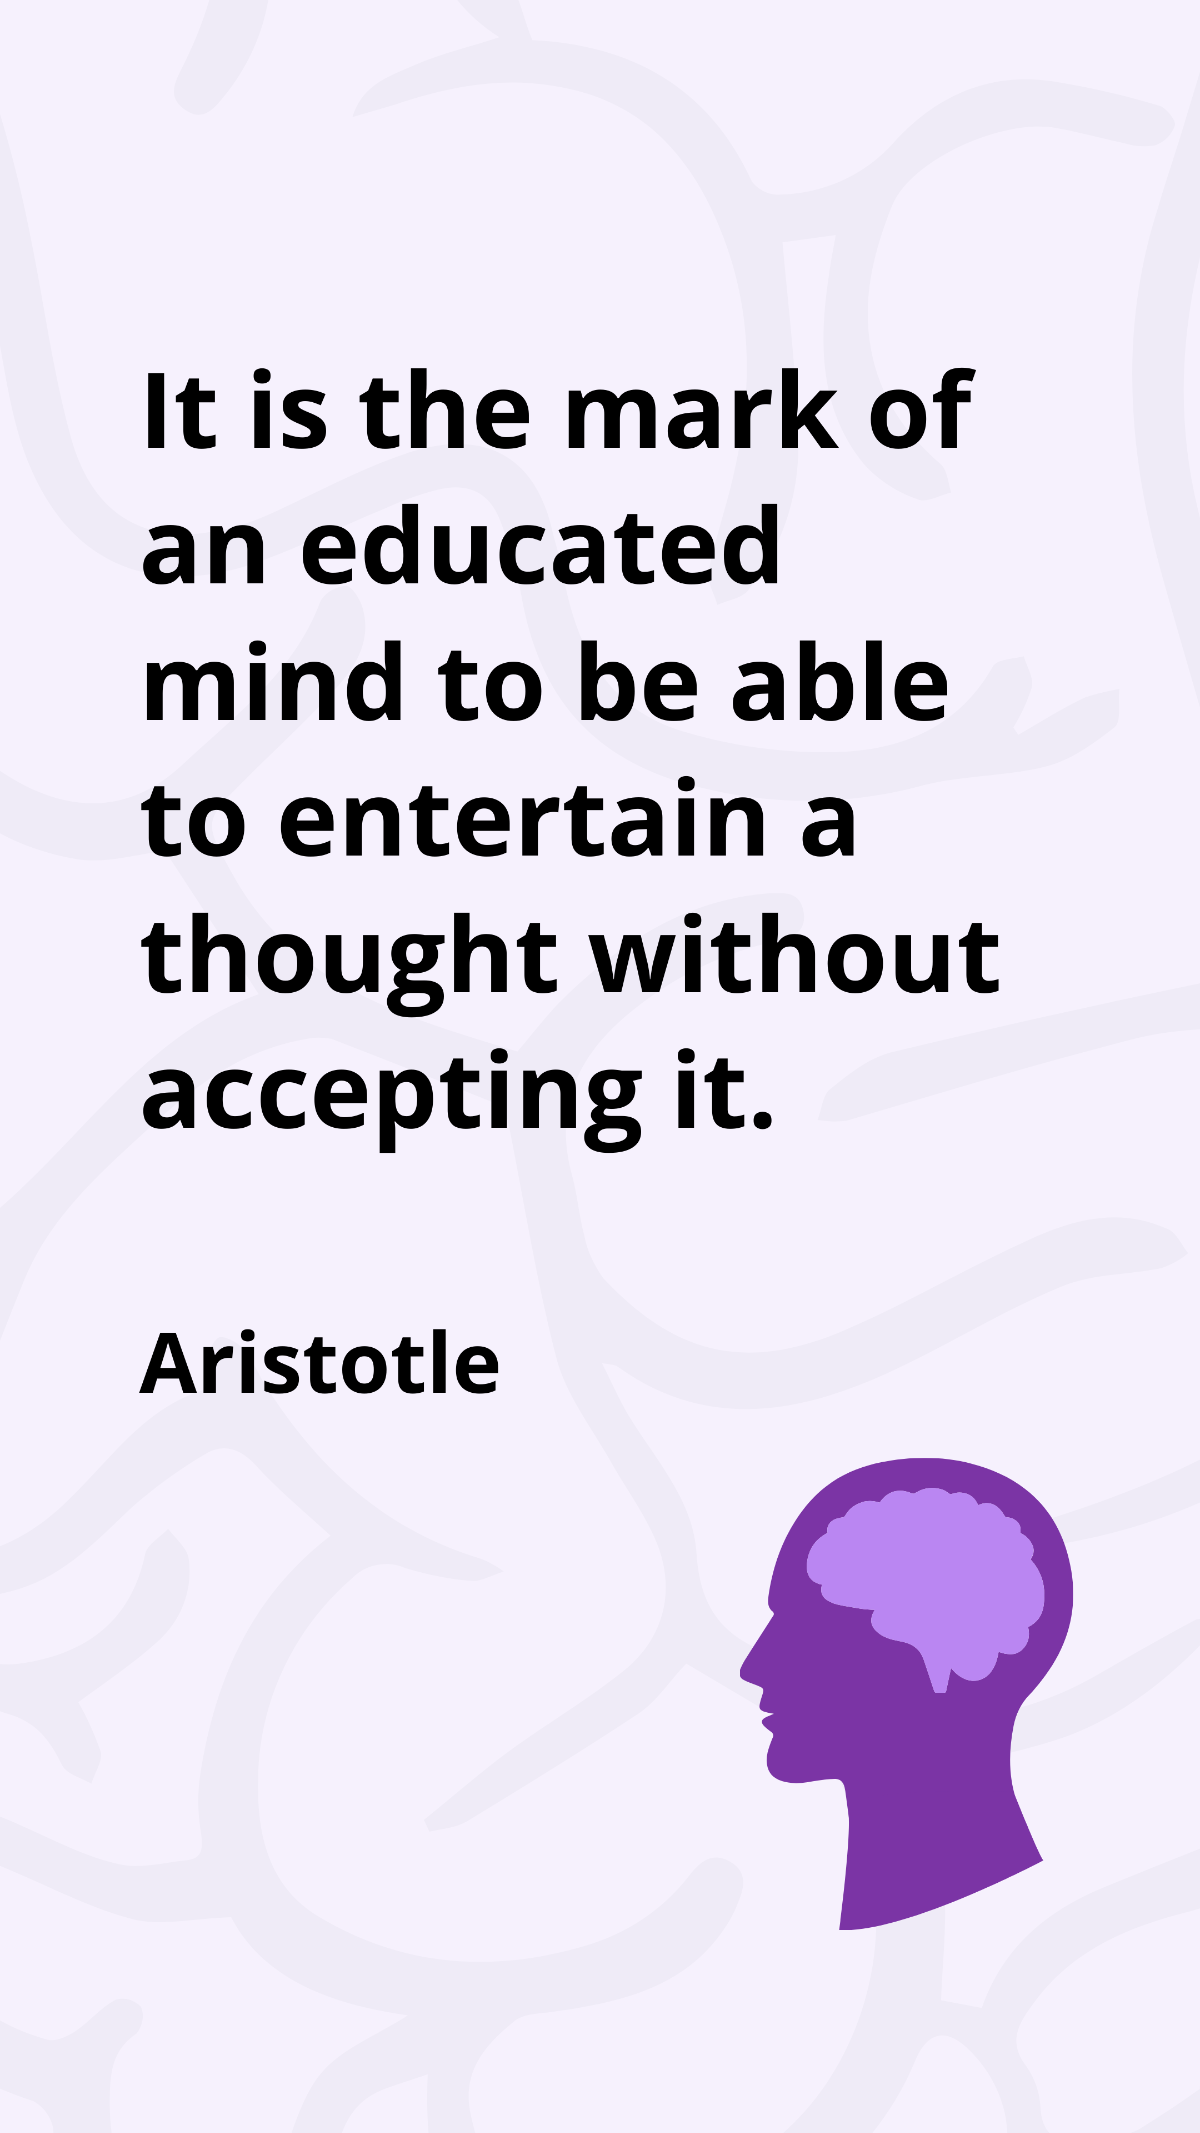 Free Aristotle -It is the mark of an educated mind to be able to entertain a thought without accepting it. Template